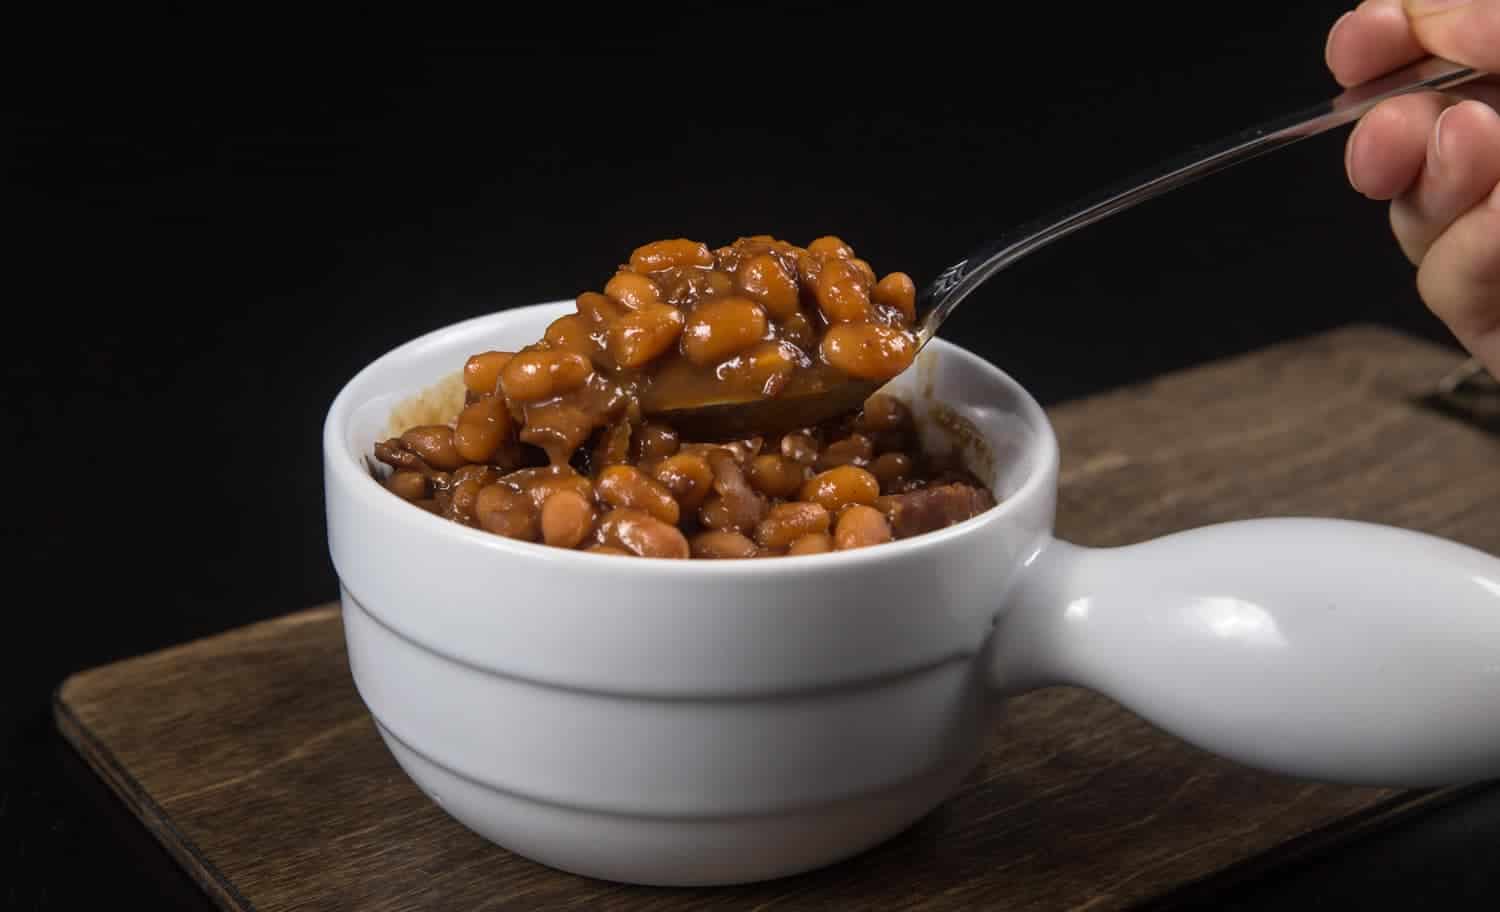 Make Smokey Instant Pot Baked Beans Recipe (Pressure Cooker Baked Beans) Homemade Baked Beans from Scratch in deliciously thick sticky sauce. Perfect for your next BBQ, picnics, potlucks, or dinners.